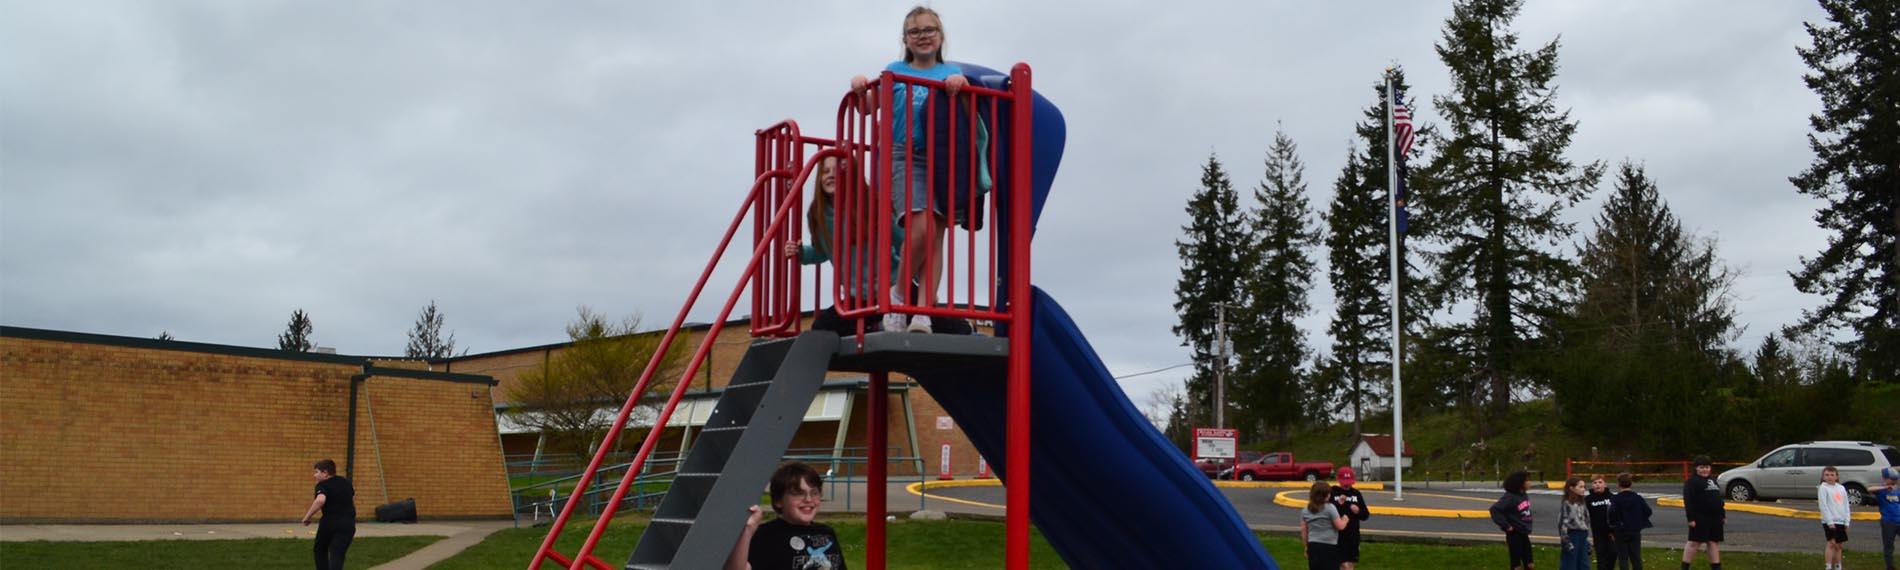 Elementary Students on the slide at recess